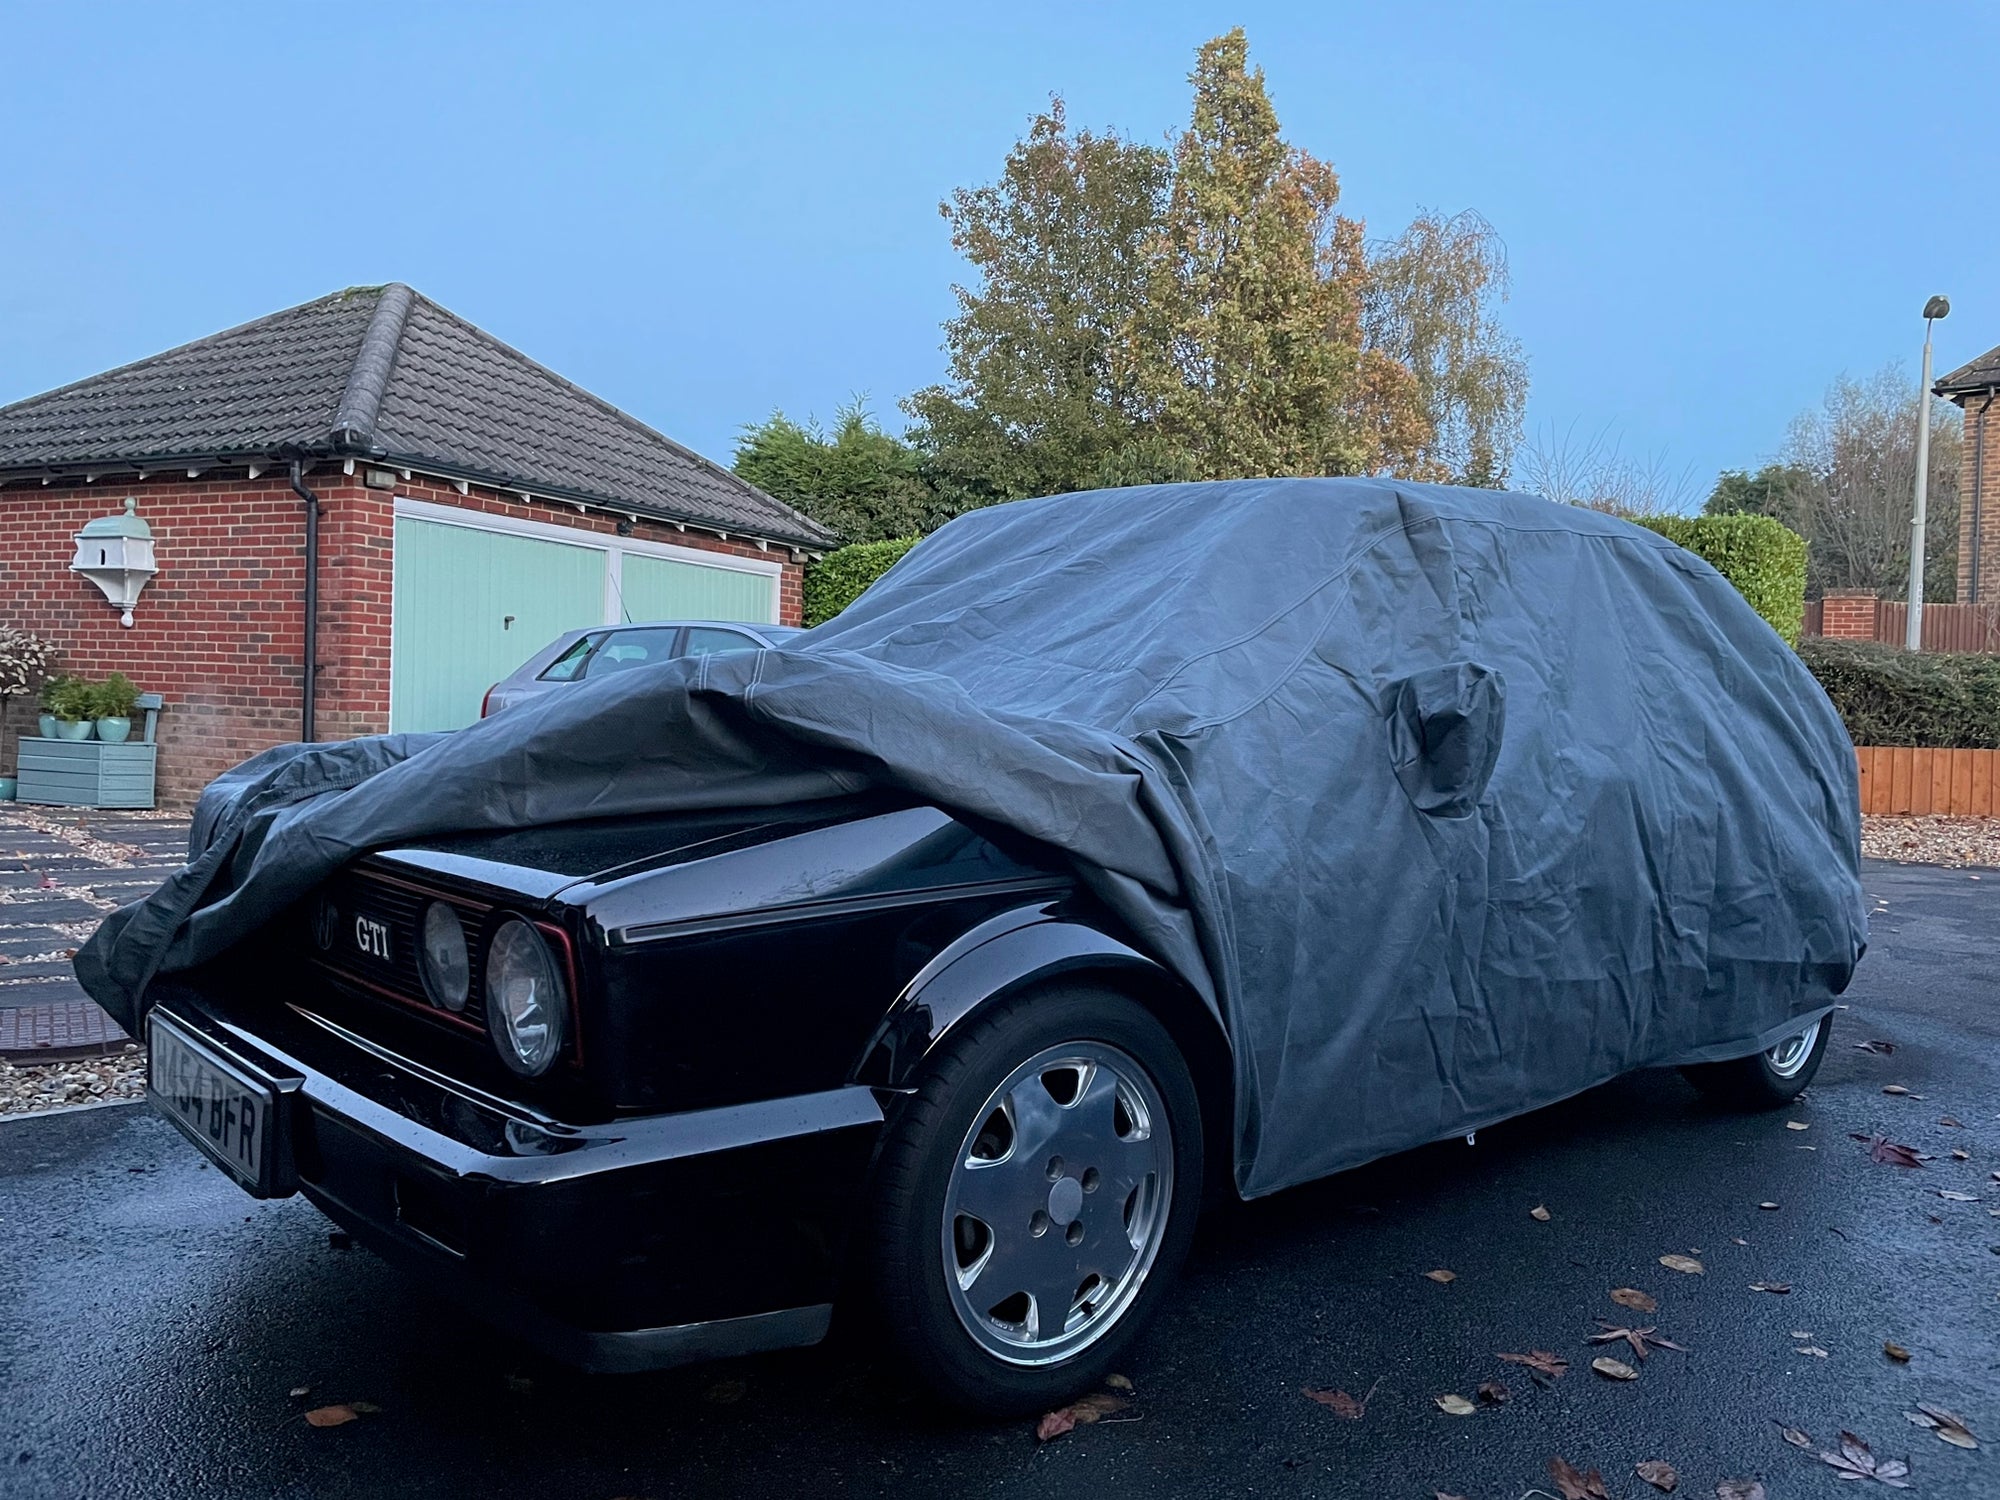 Stormforce outdoor breathable car covers for VOLKSWAGEN - Storm Car Covers